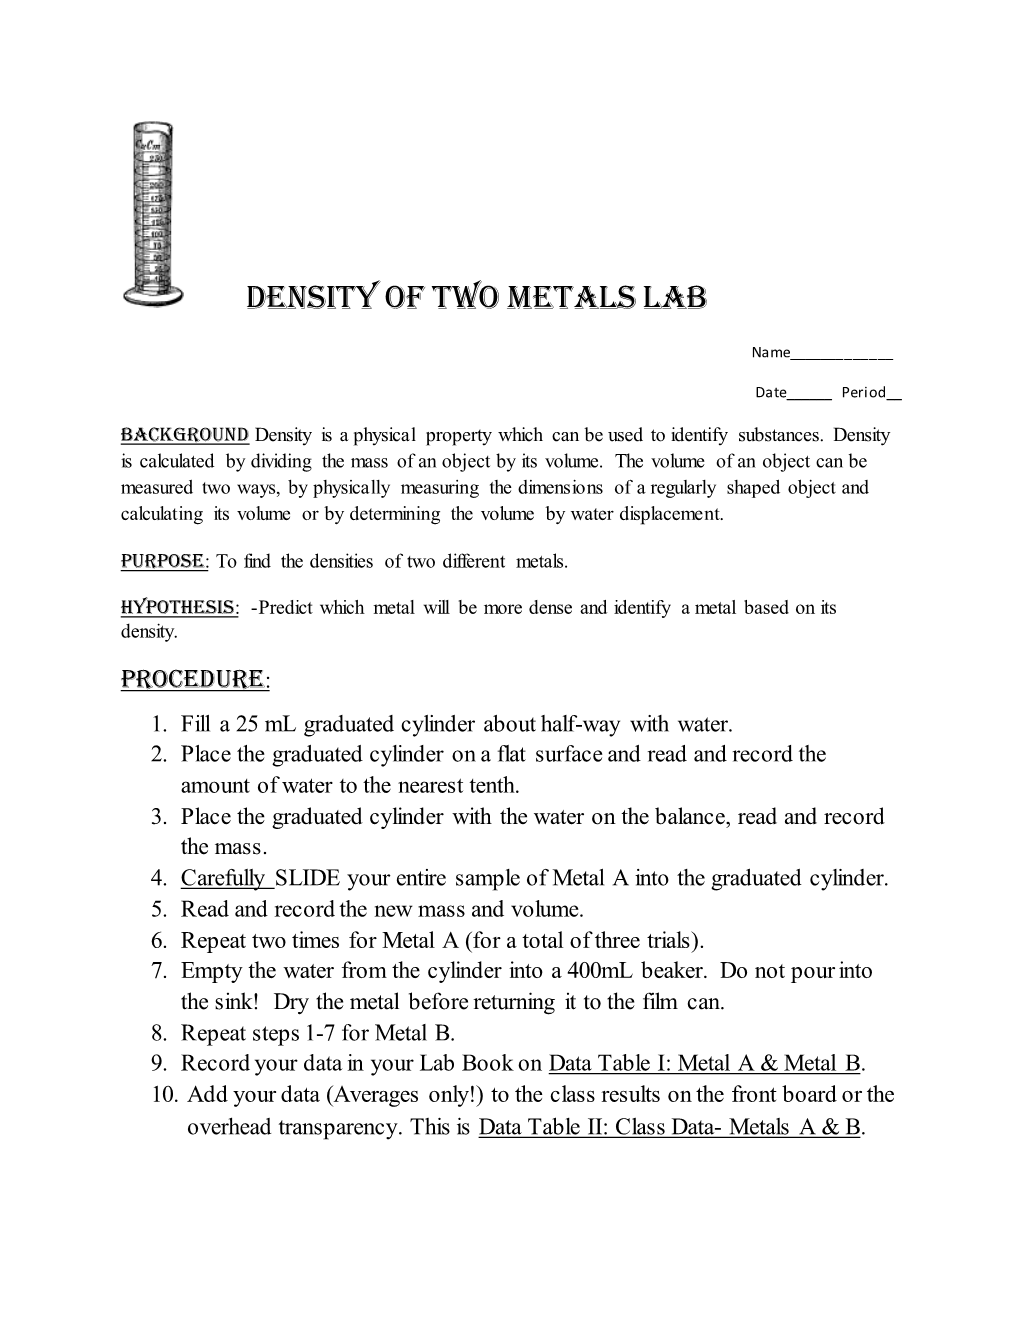 Density of Two Metals Lab